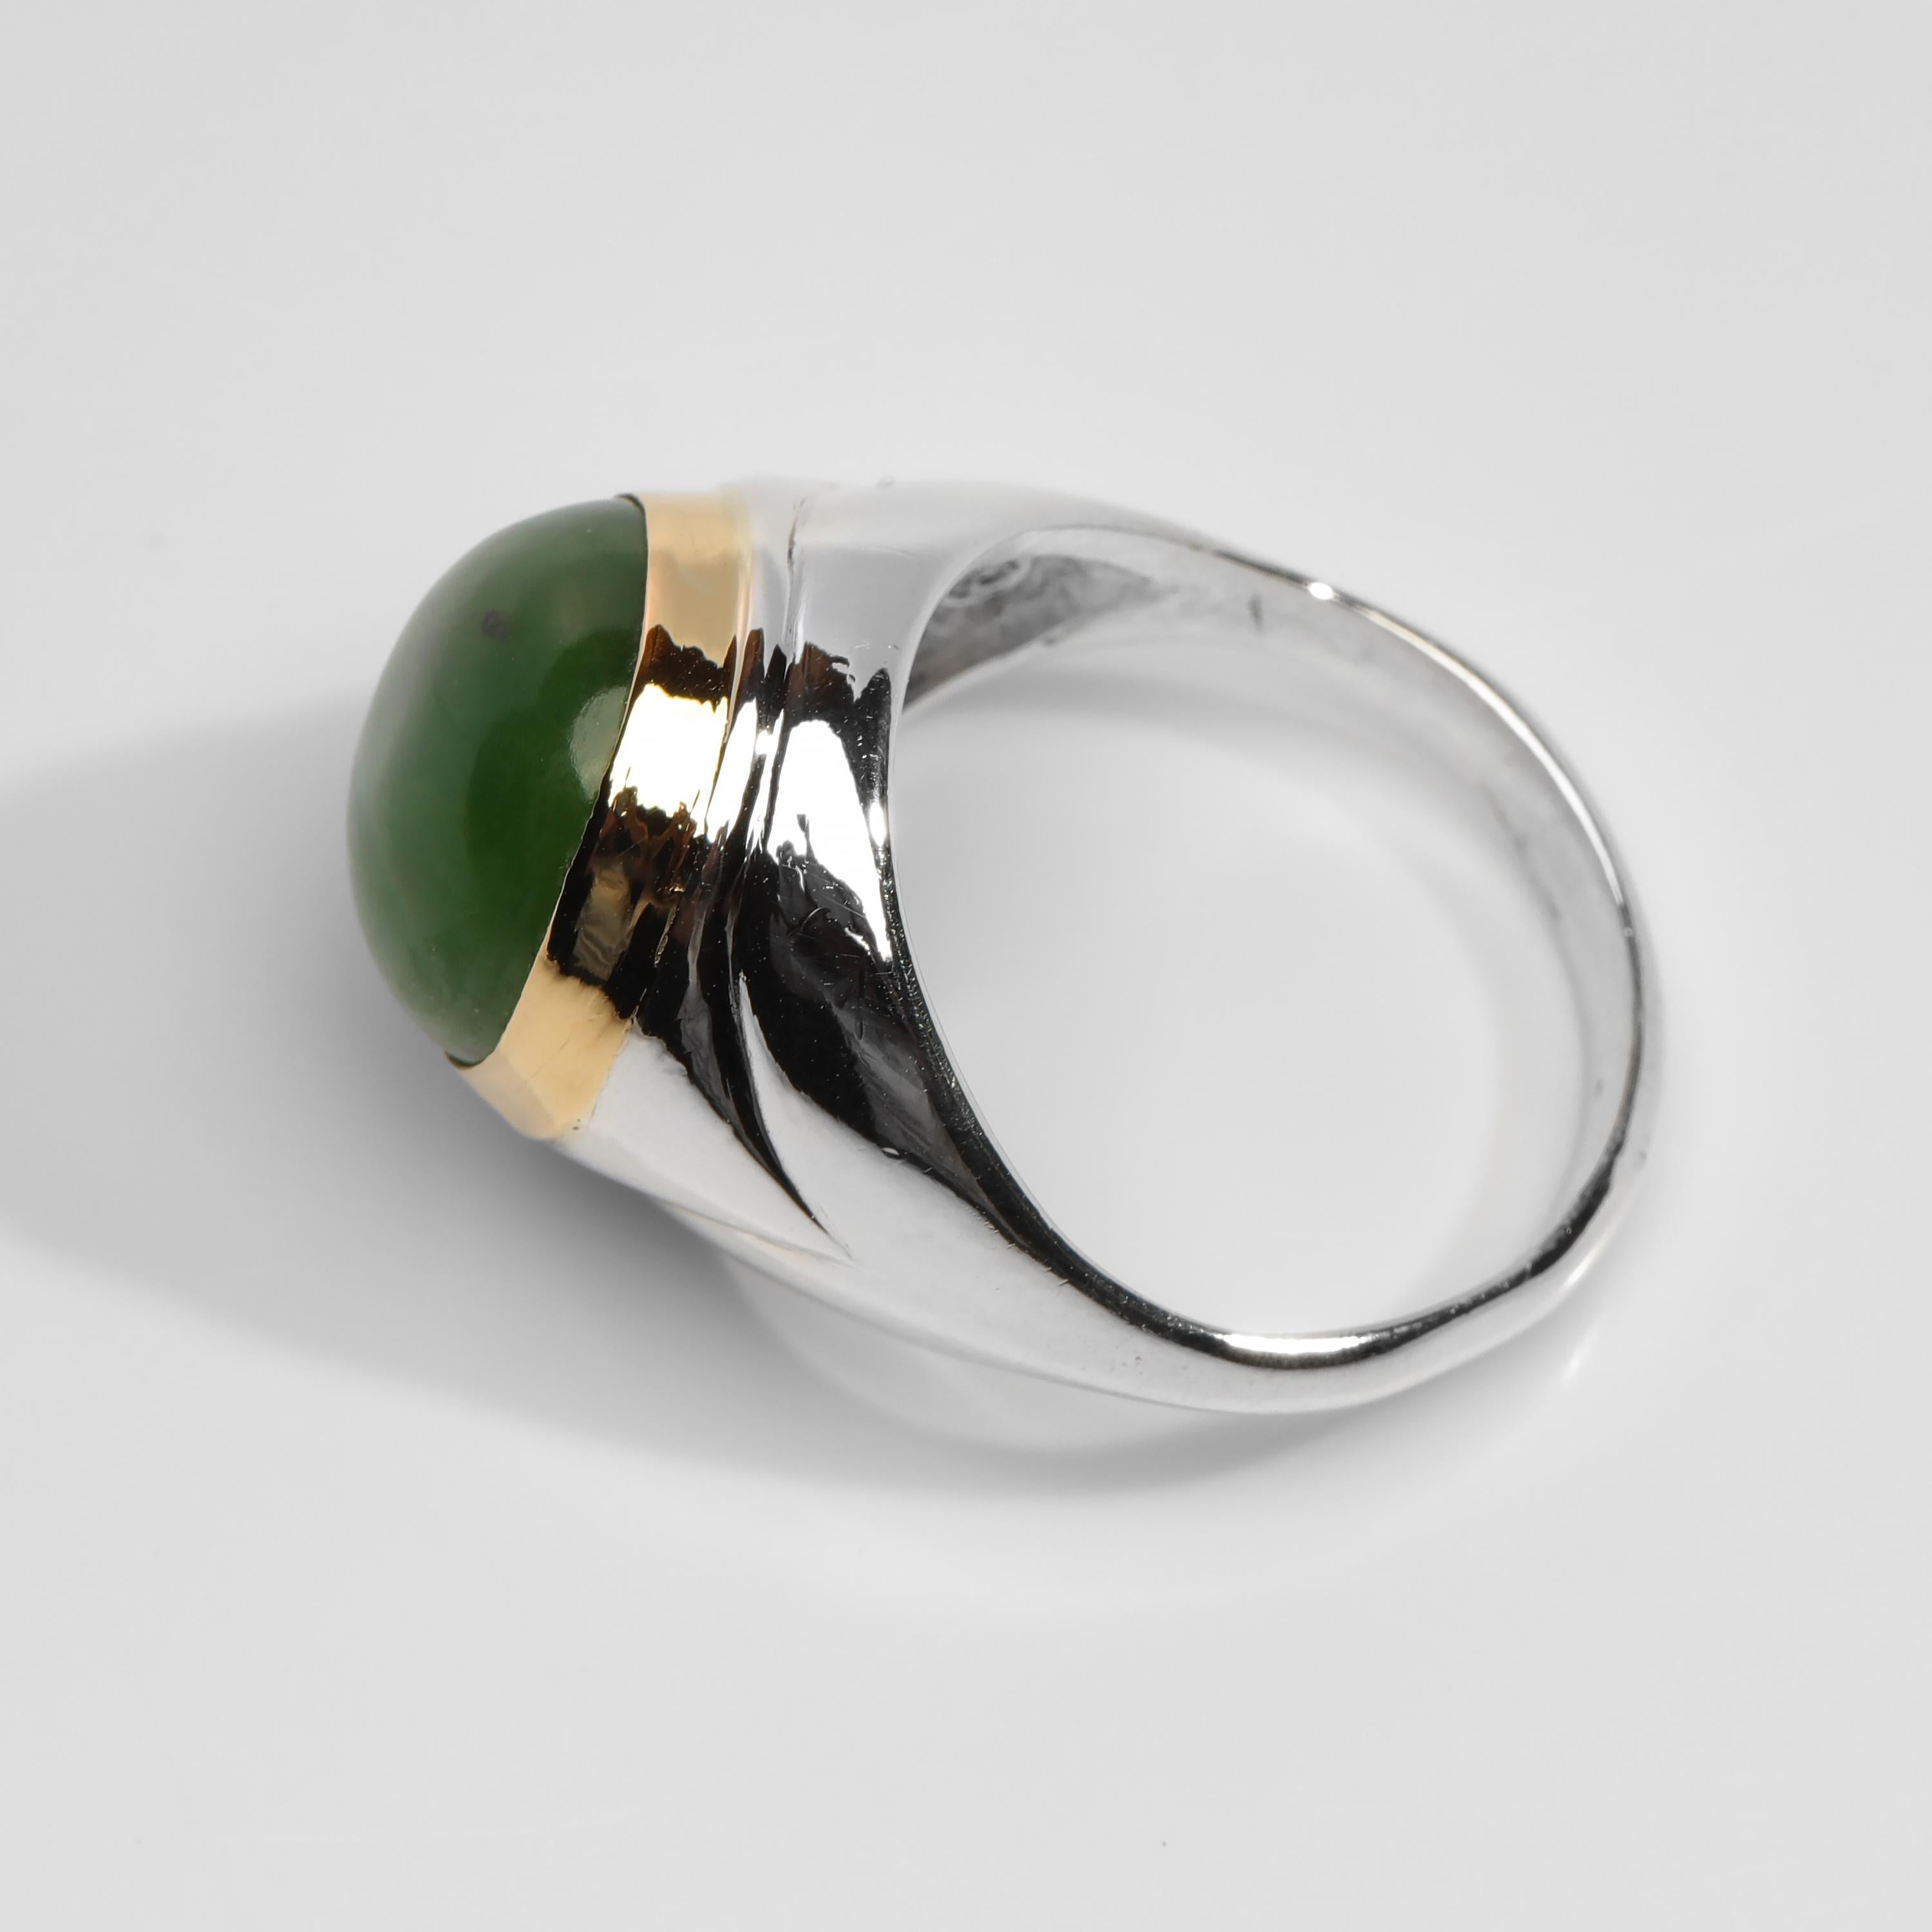 Women's or Men's British Columbian Jade Ring in Silver and Gold